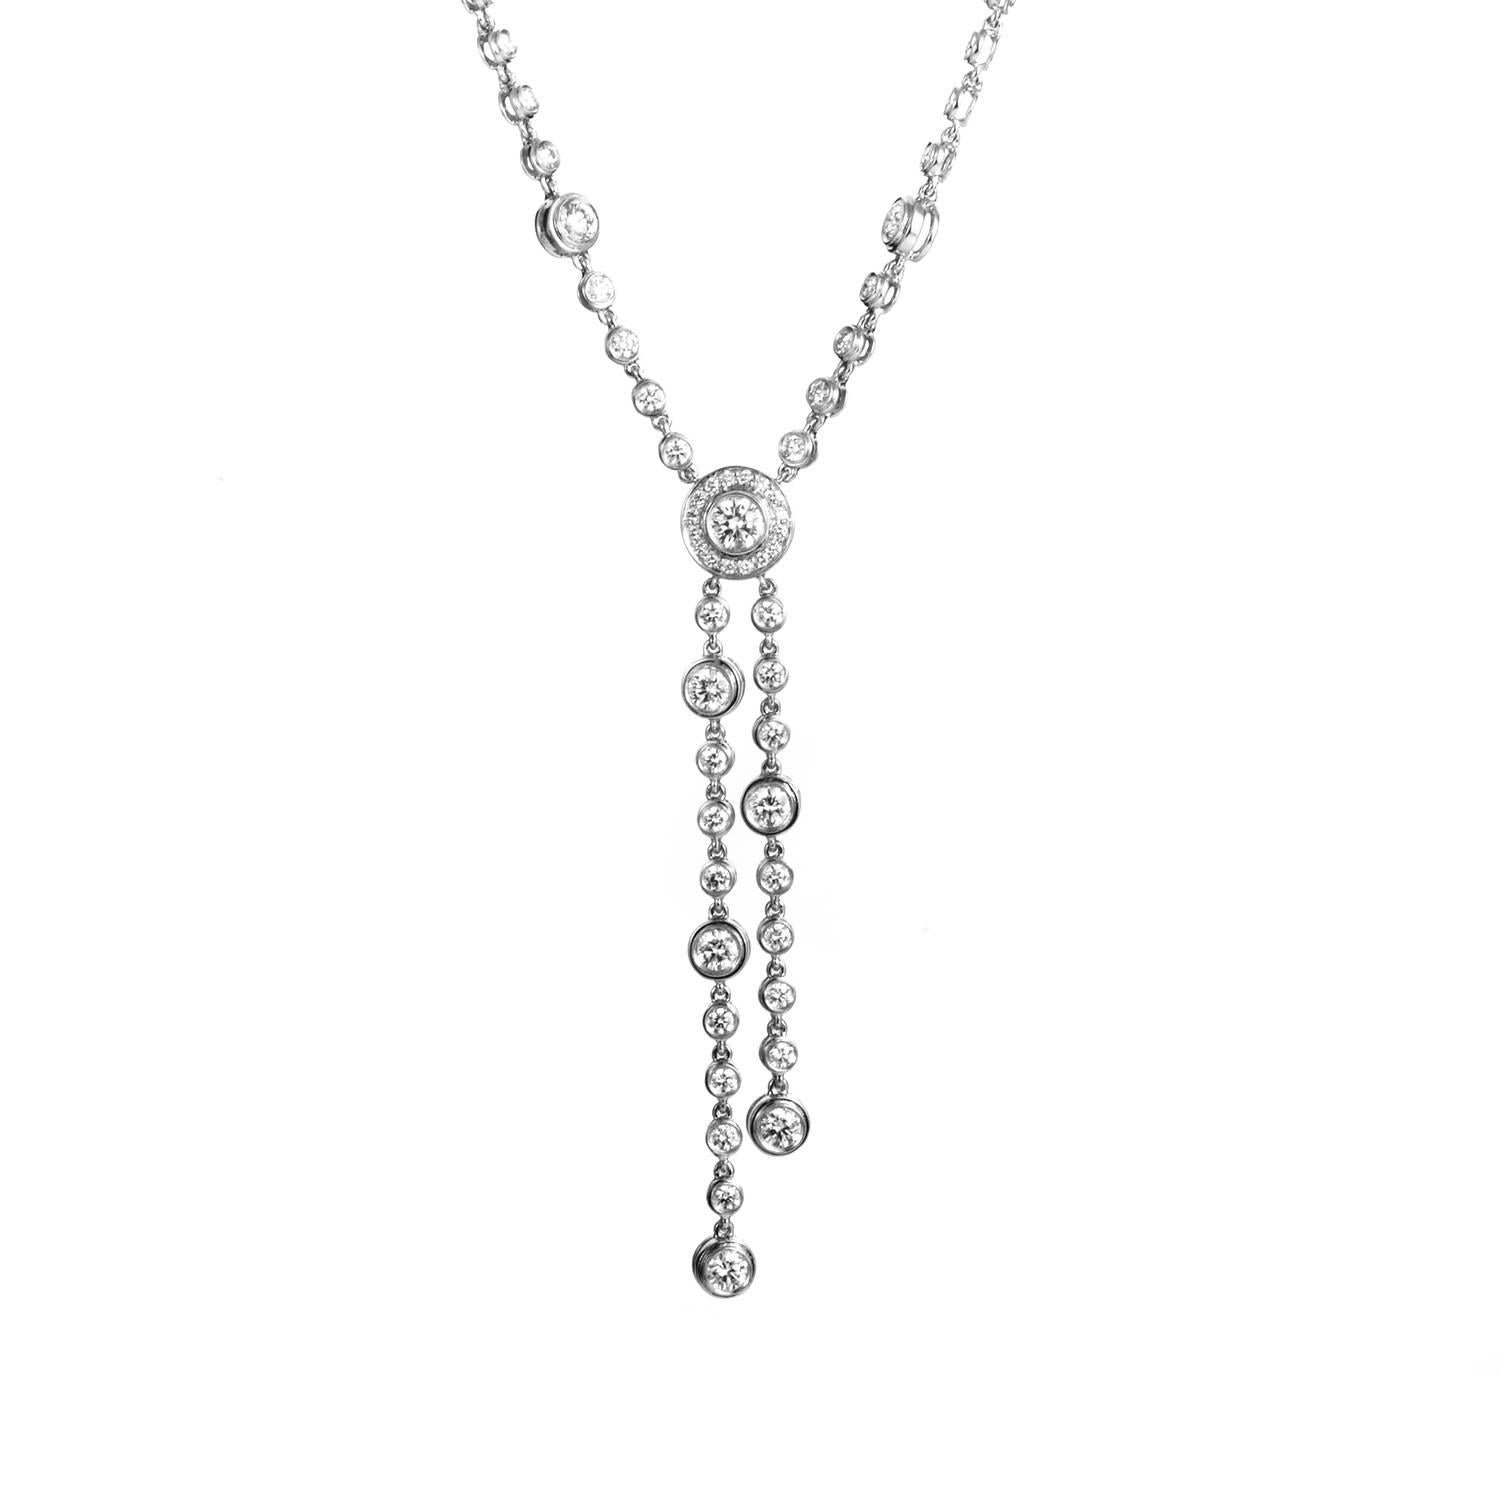 Tiffany & Co. Circlet Platinum and Diamond Double Drop Necklace